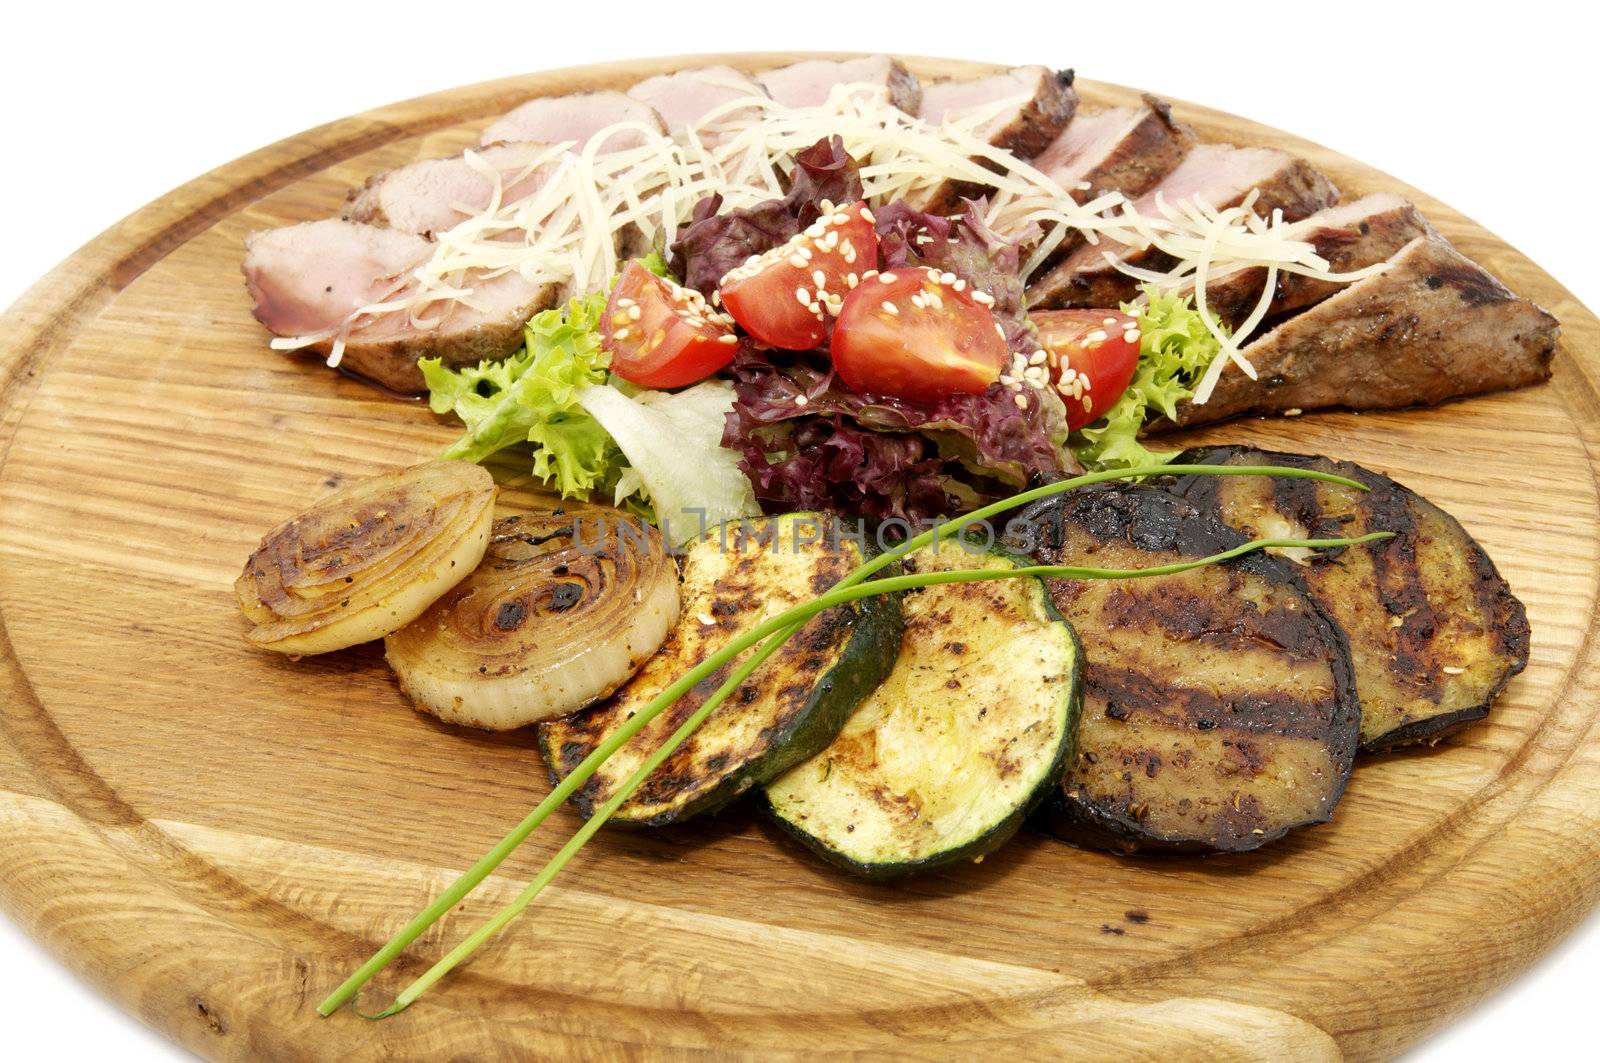 grilled vegetables and meat on a wooden platter